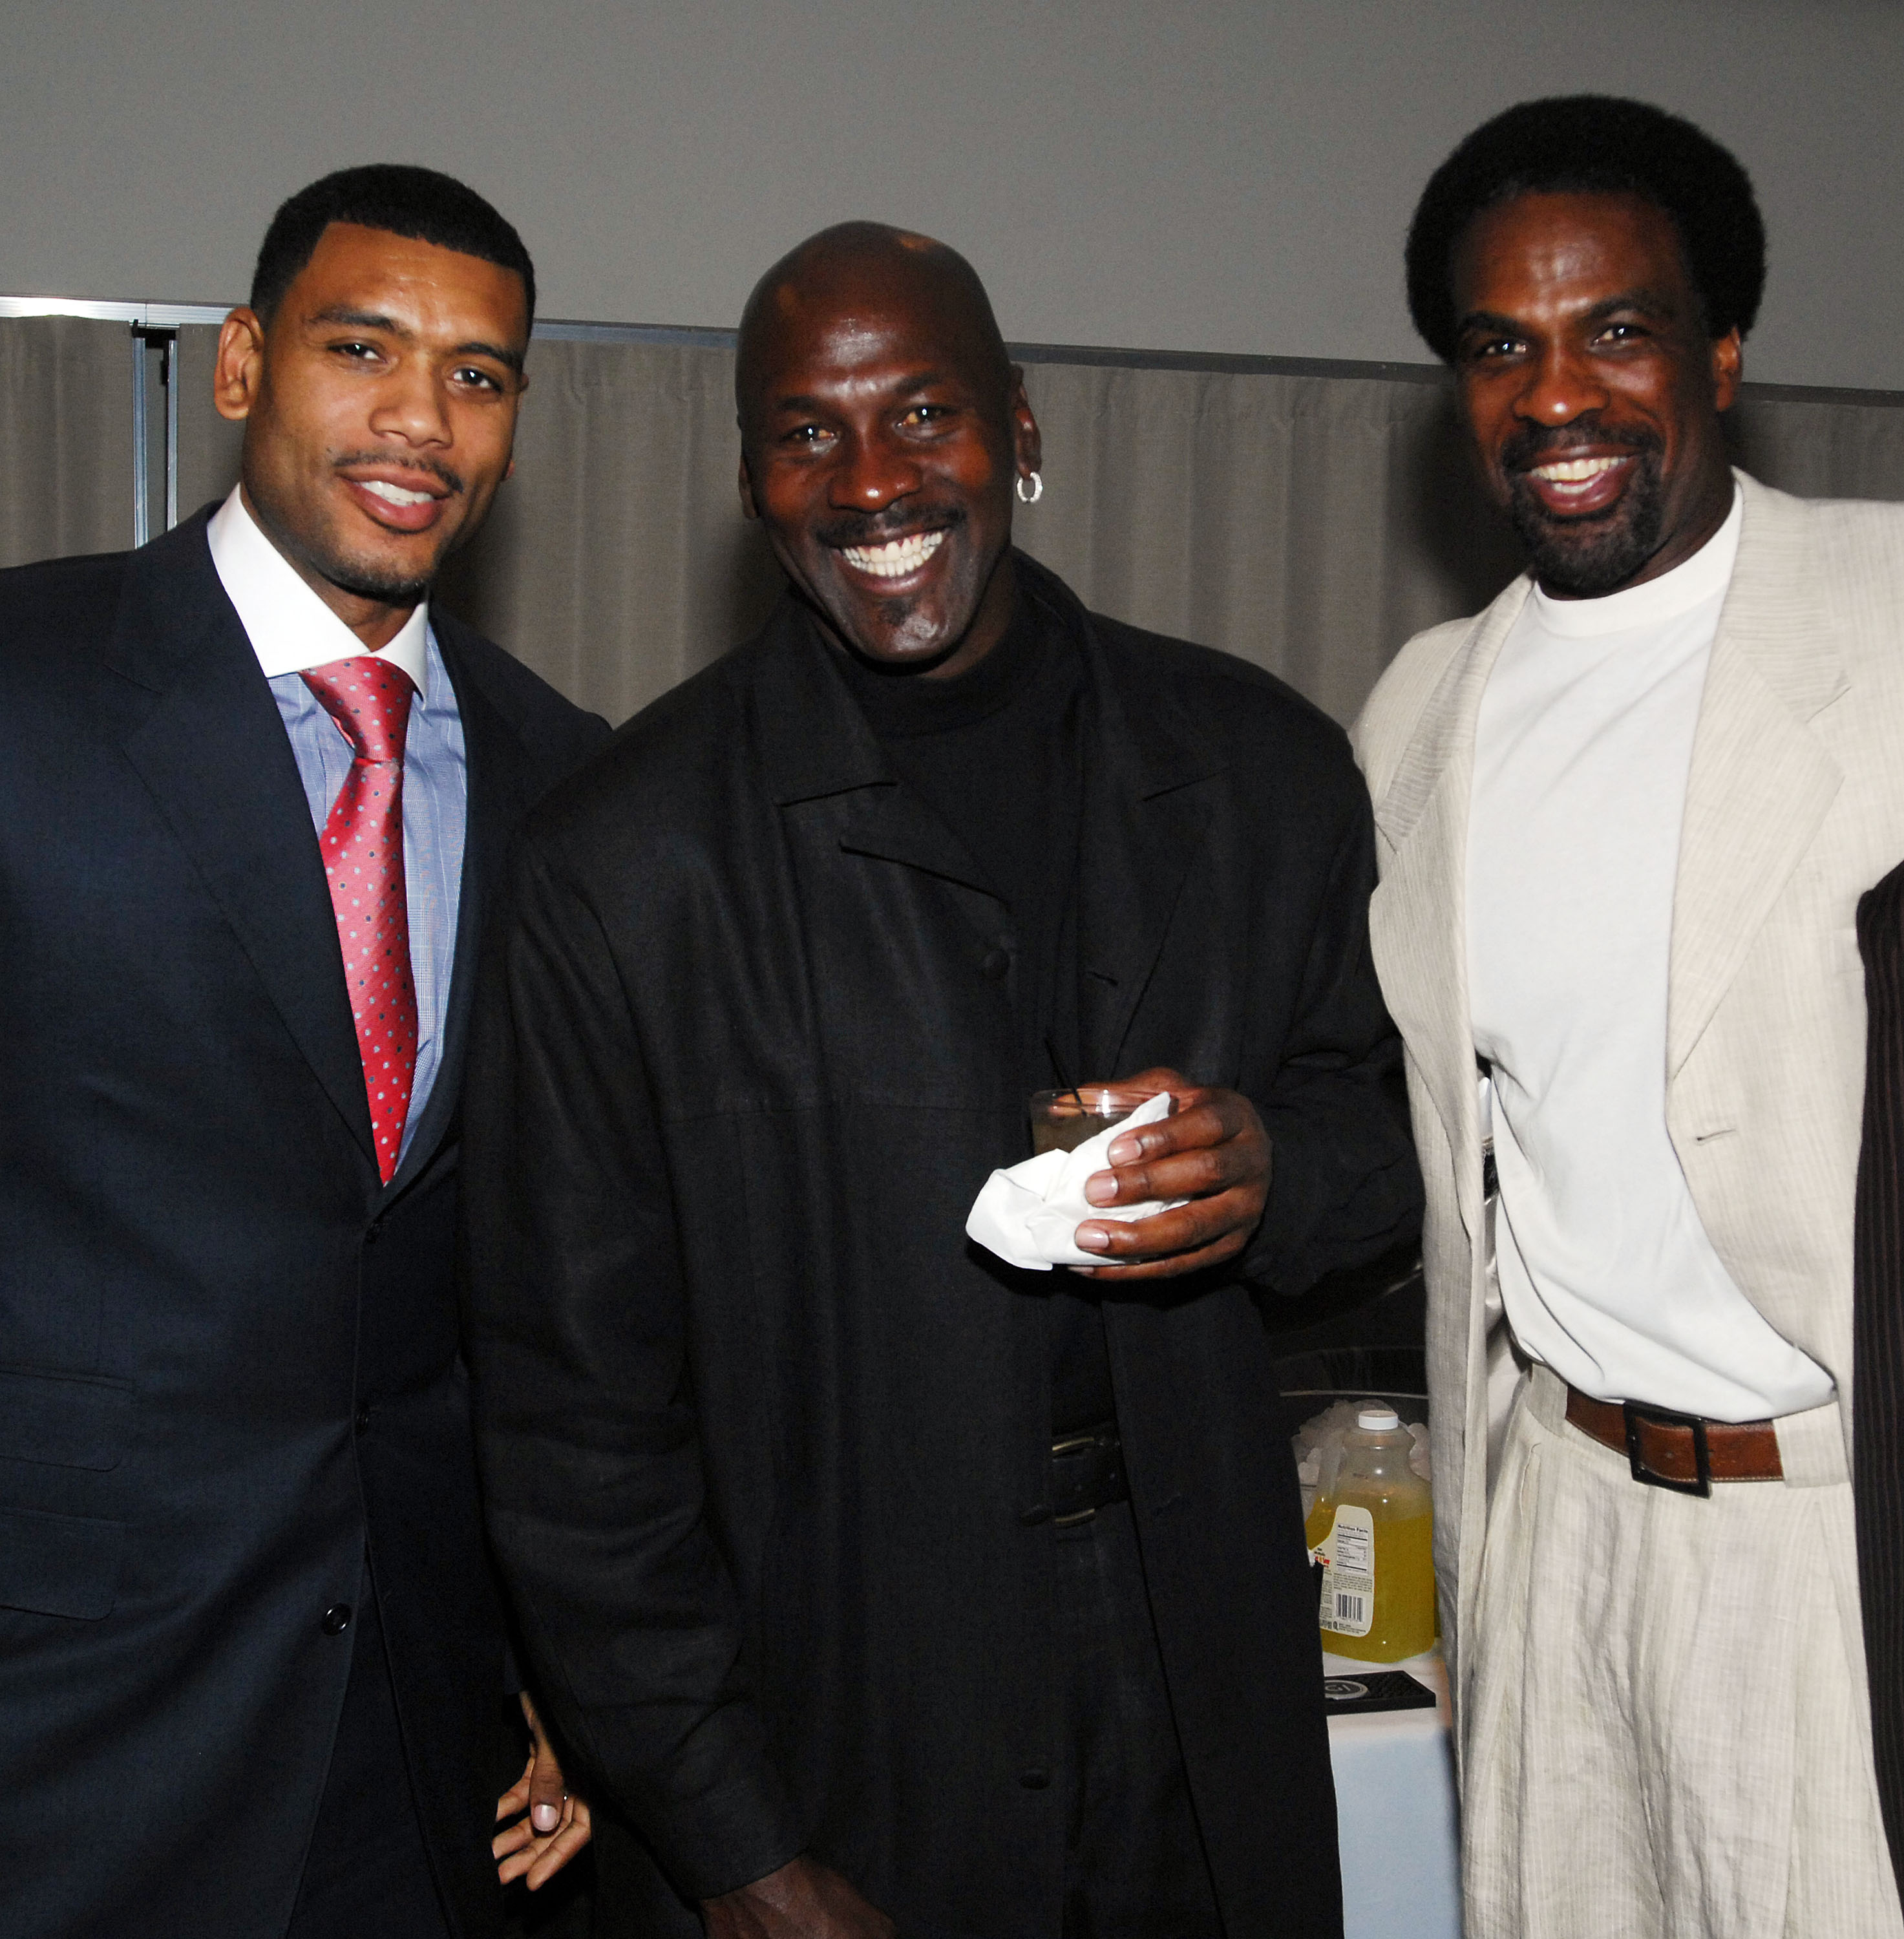 LOUISVILLE, KY - MAY 04: NBA basketball legends (L-R) Allen Houston, Michael Jordan and Charles Oakley pose at the Muhammad Ali birthday celebration and VIP Reception during the events for the 133rd Kentucky Derby, May 4, 2007 in Louisville, Kentucky. (Ph